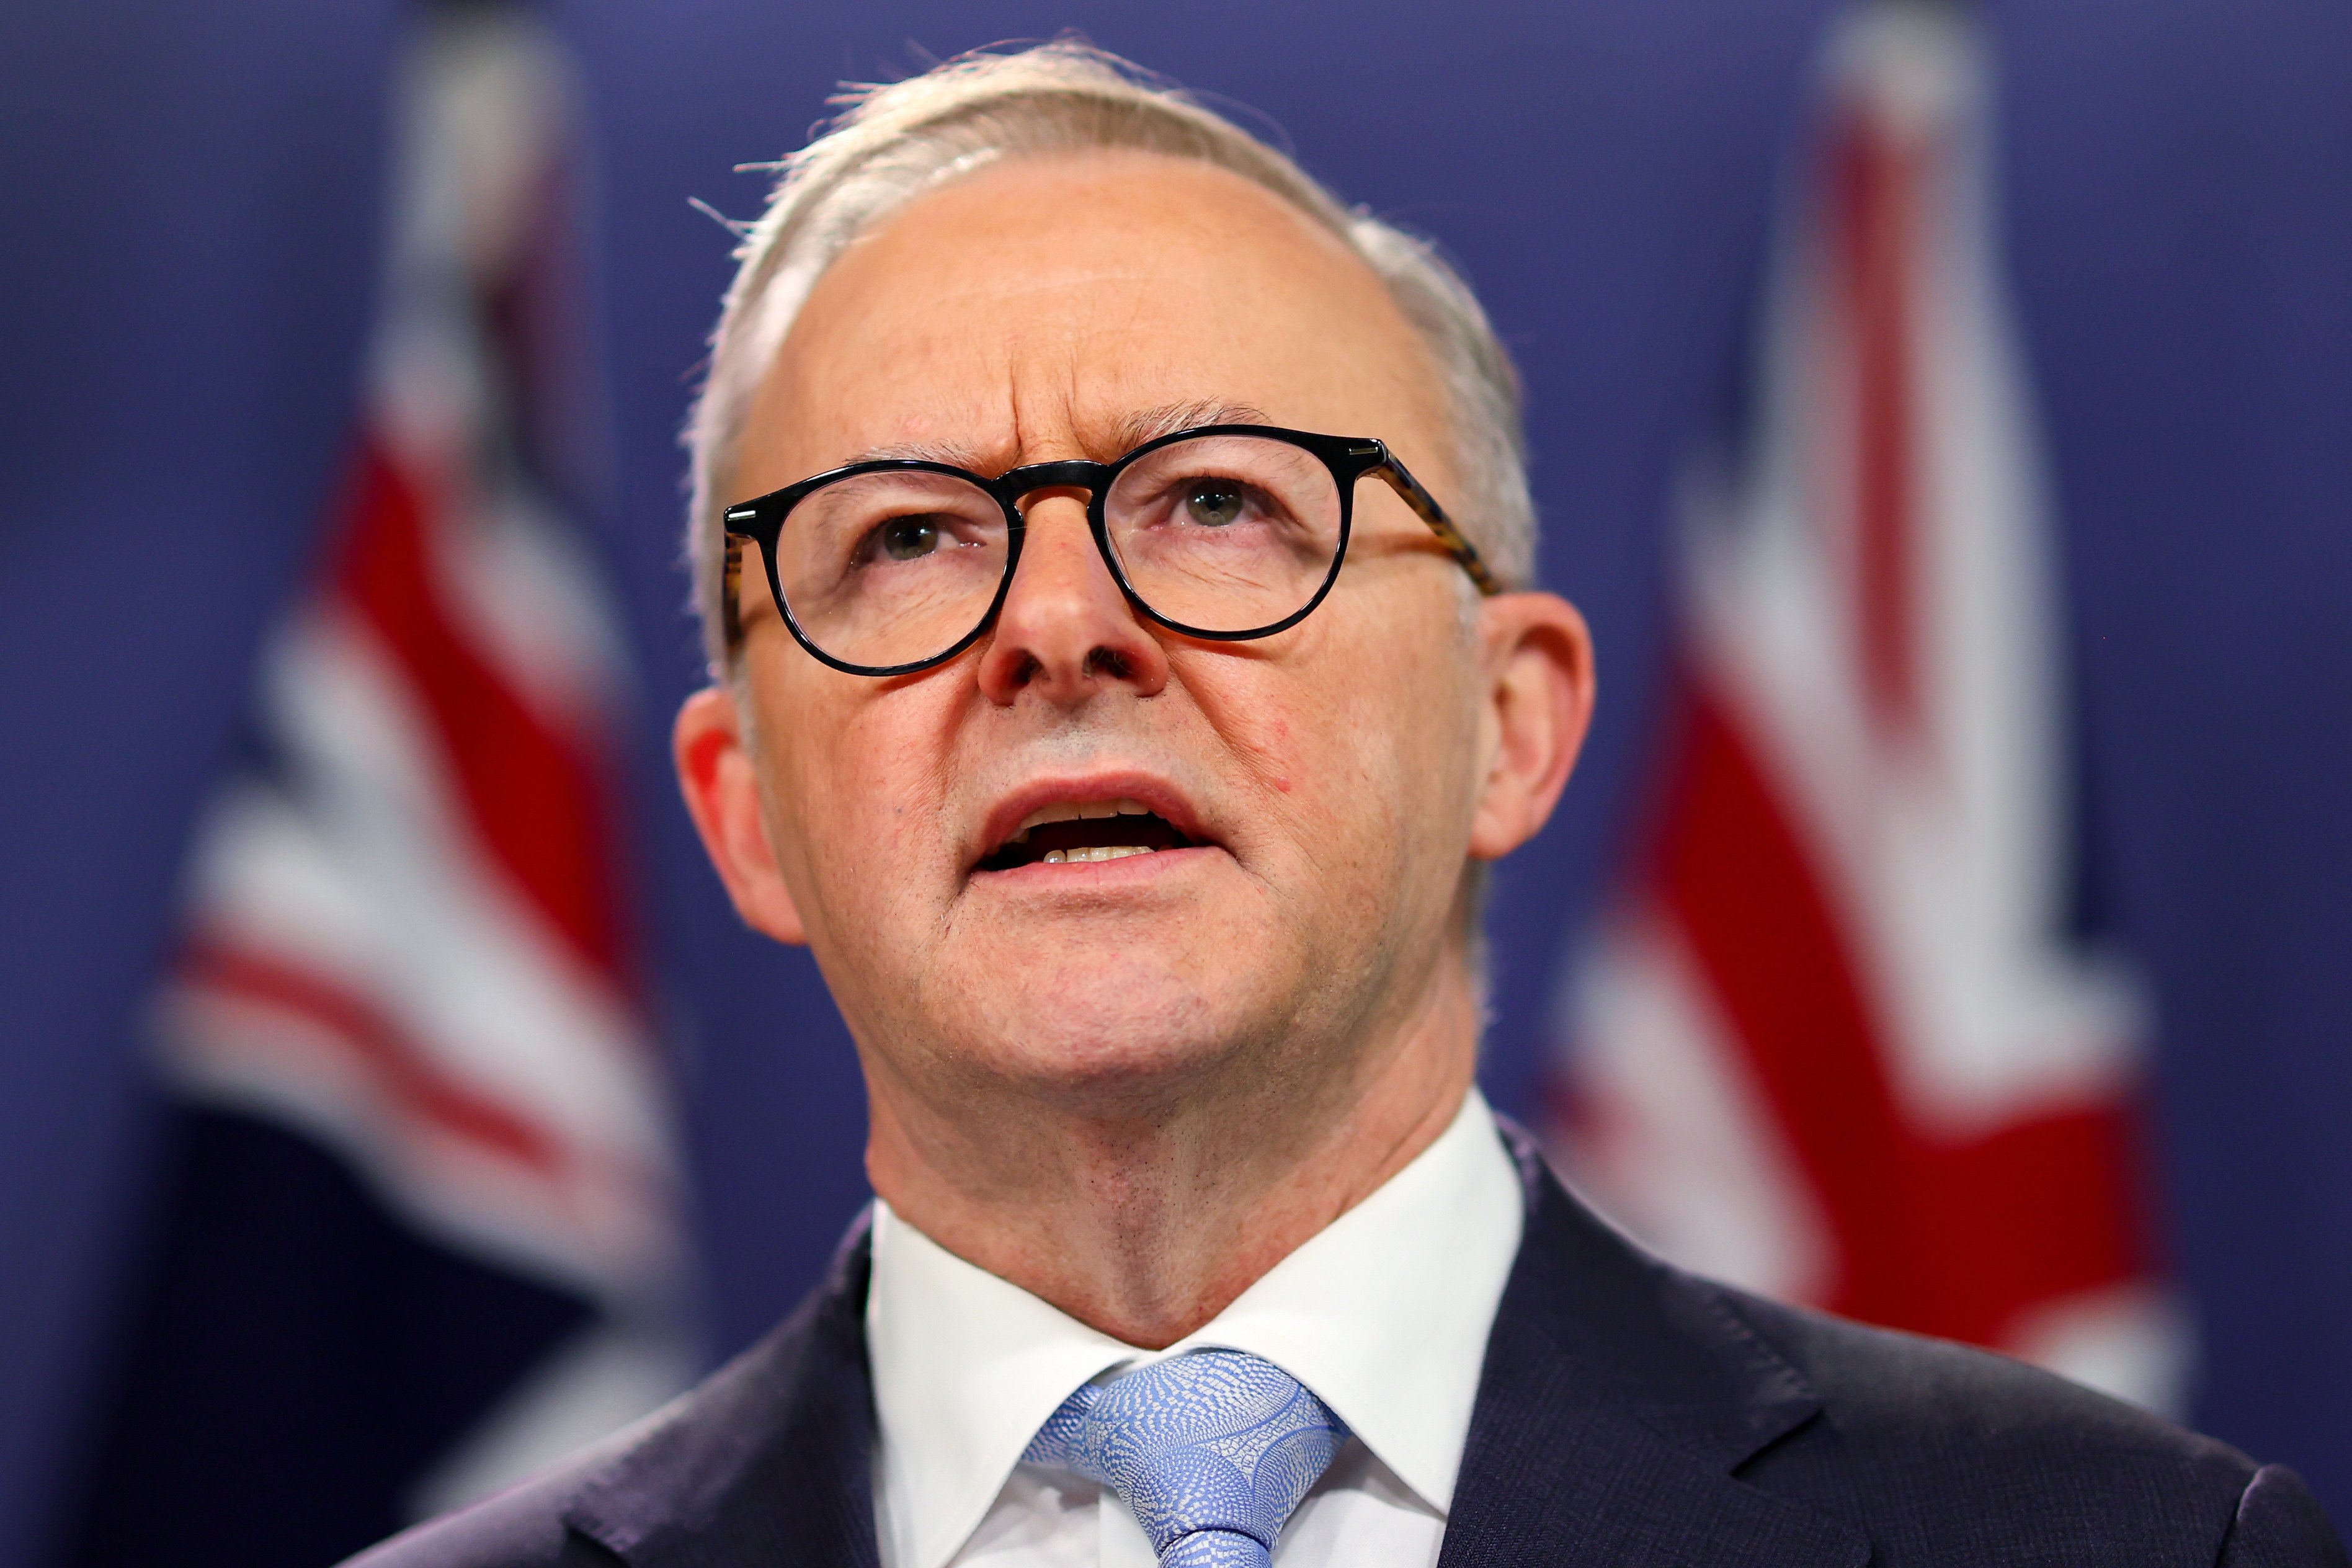 Australian Prime Minister Anthony Albanese is keen on mending frayed trade ties with China when he visits next month. Photo: Bloomberg